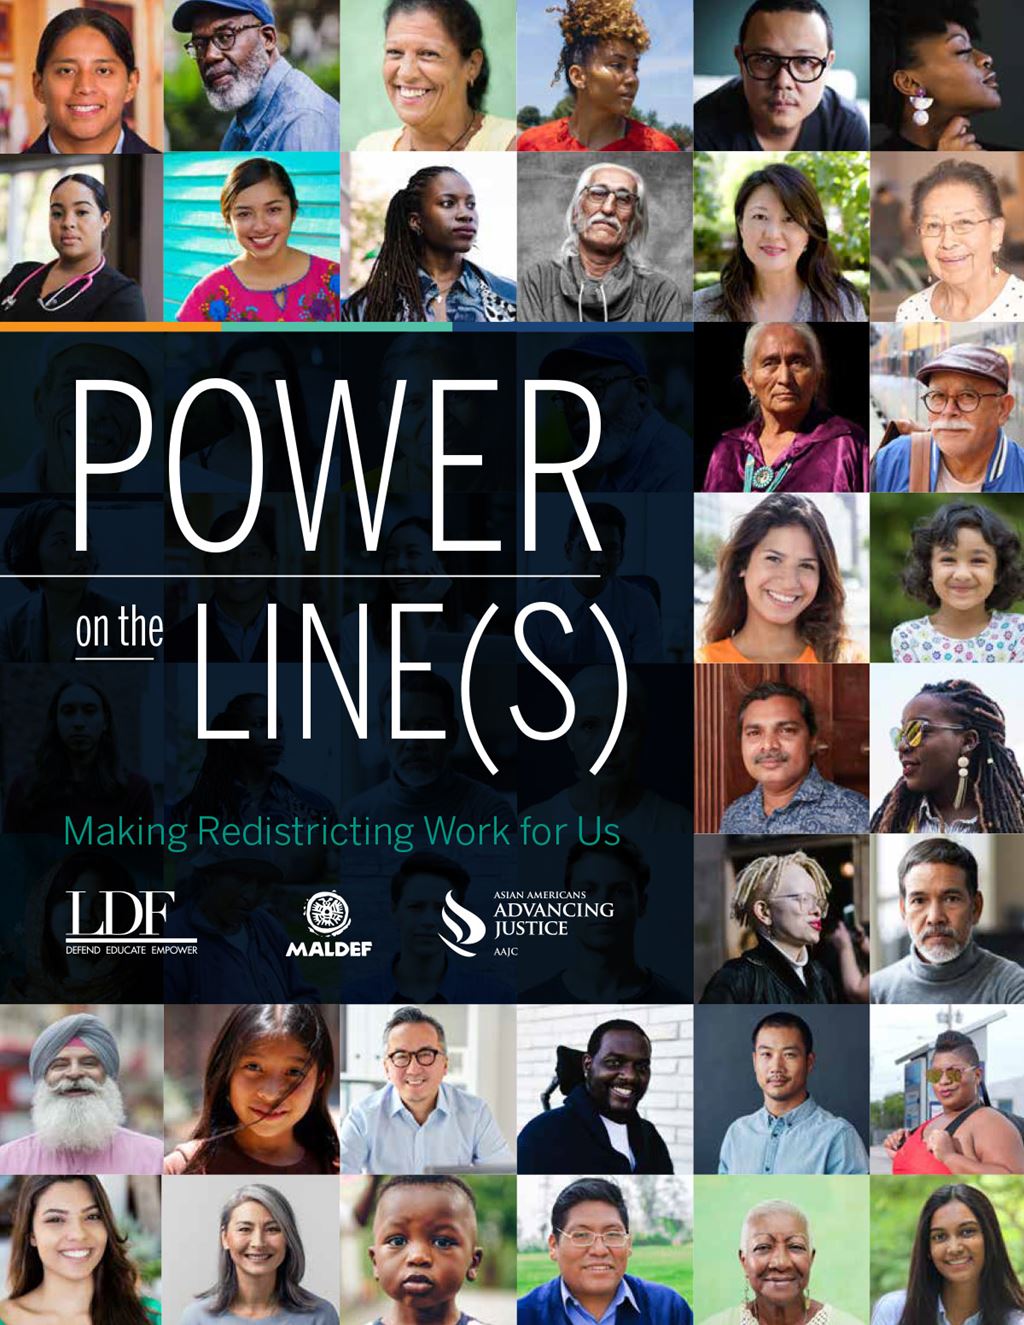 Cover of "Power on the Line(s)" brochure with diverse grid of portraits